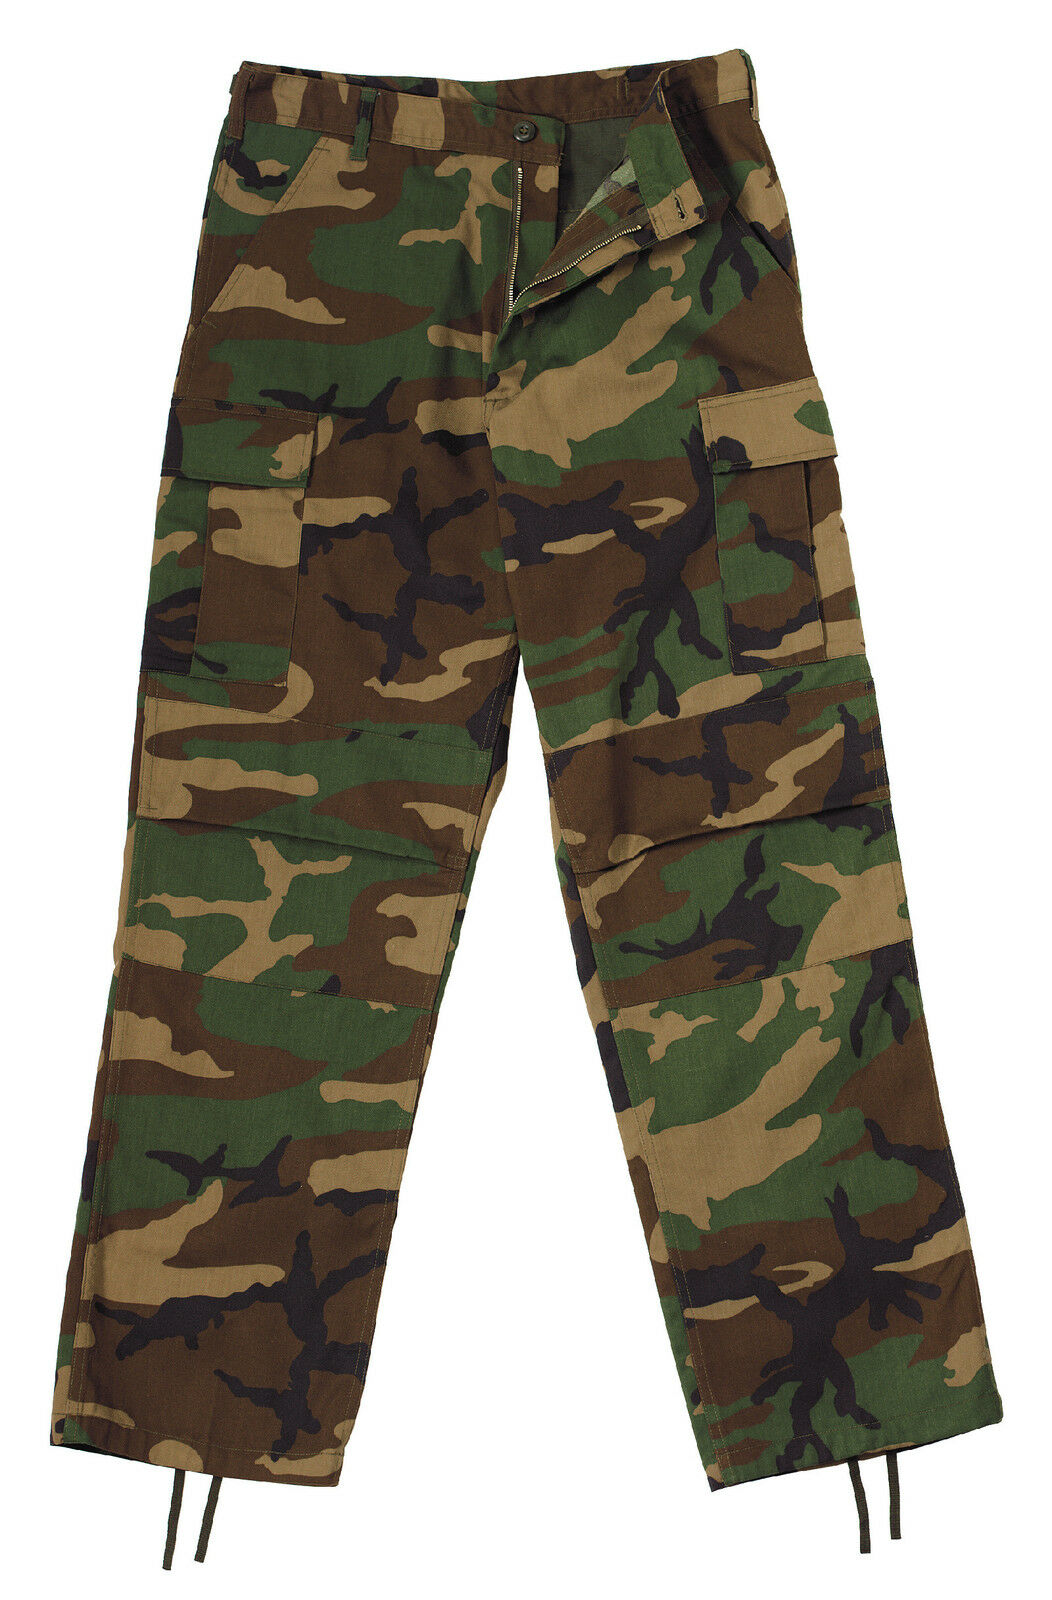 Rothco Relaxed Fit Zipper Fly BDU Pants - Woodland Camo